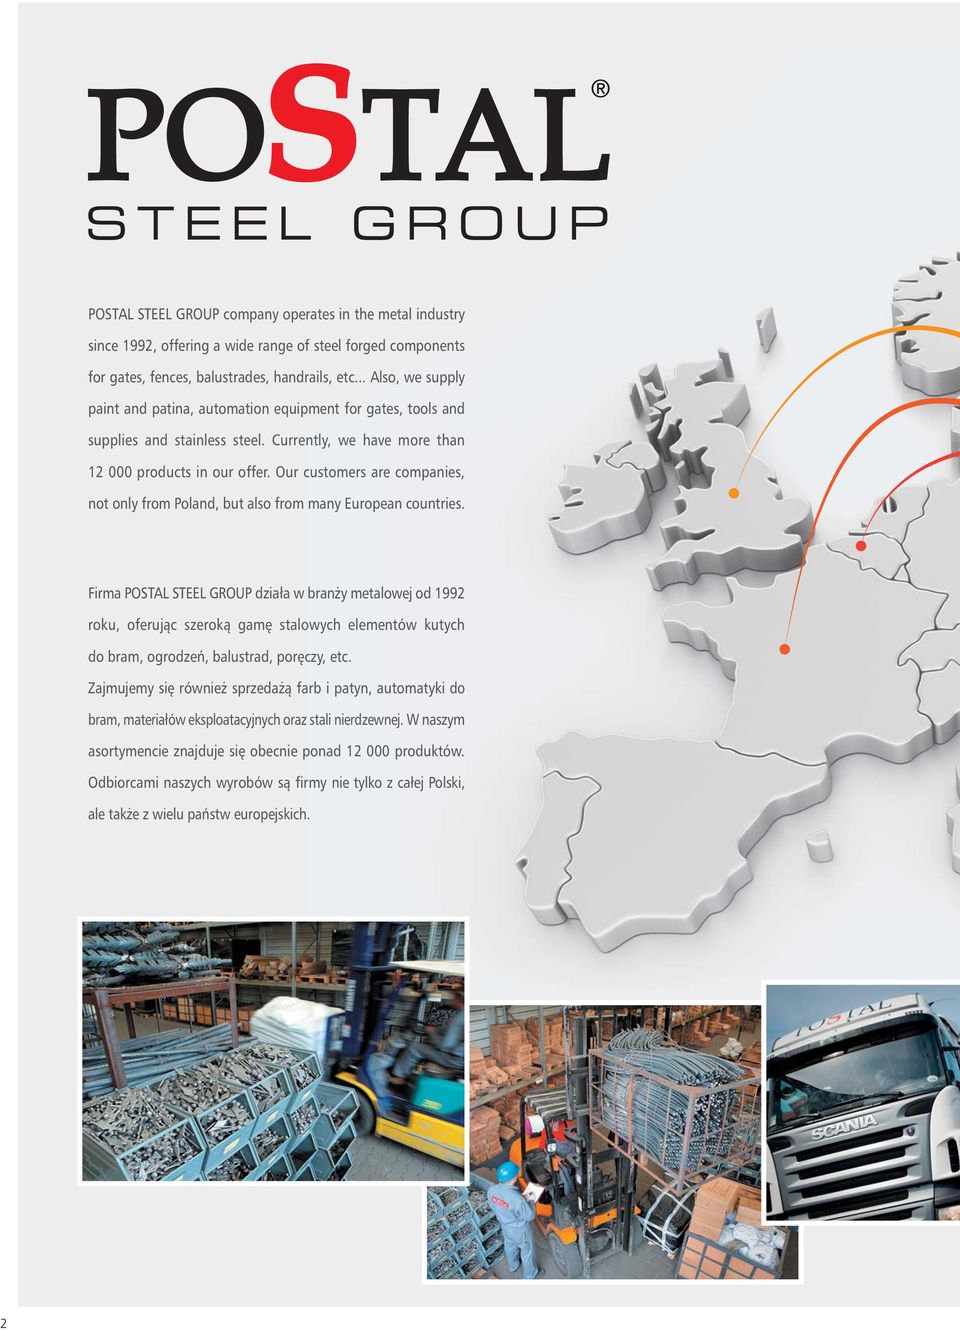 Our customers are companies, not only from Poland, but also from many European countries.